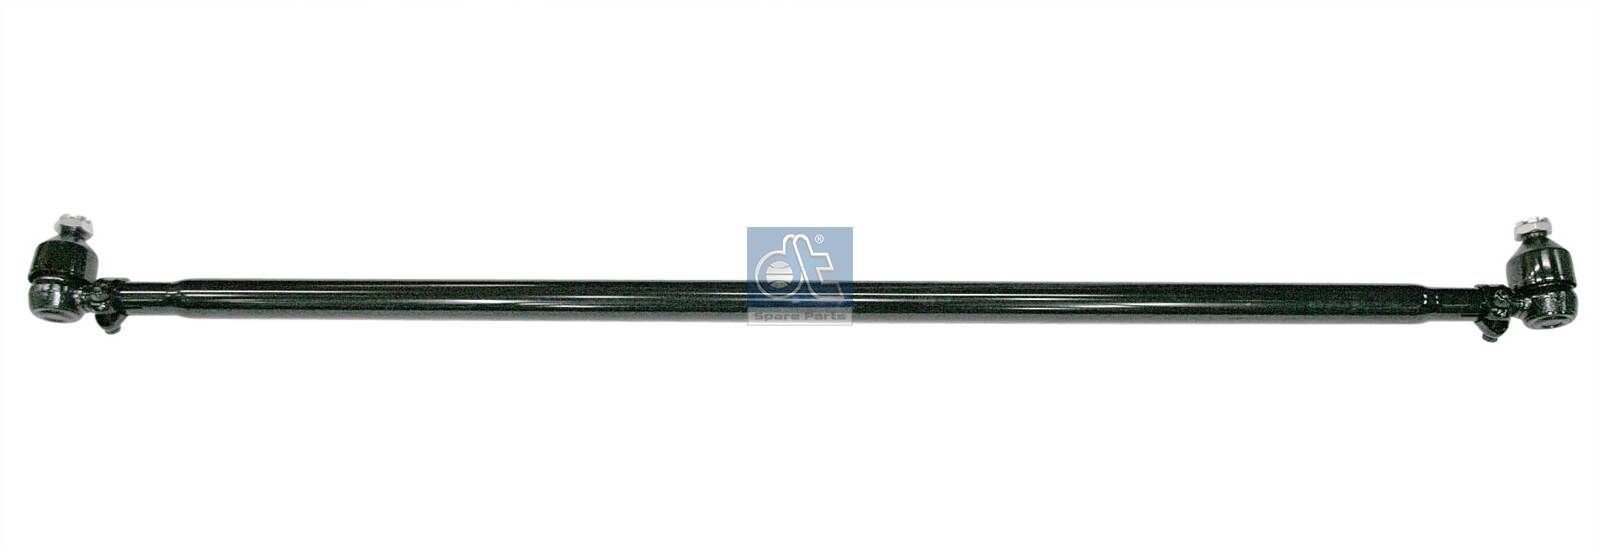 DT Spare Parts 4.63733 Rod Assembly 941 330 0003